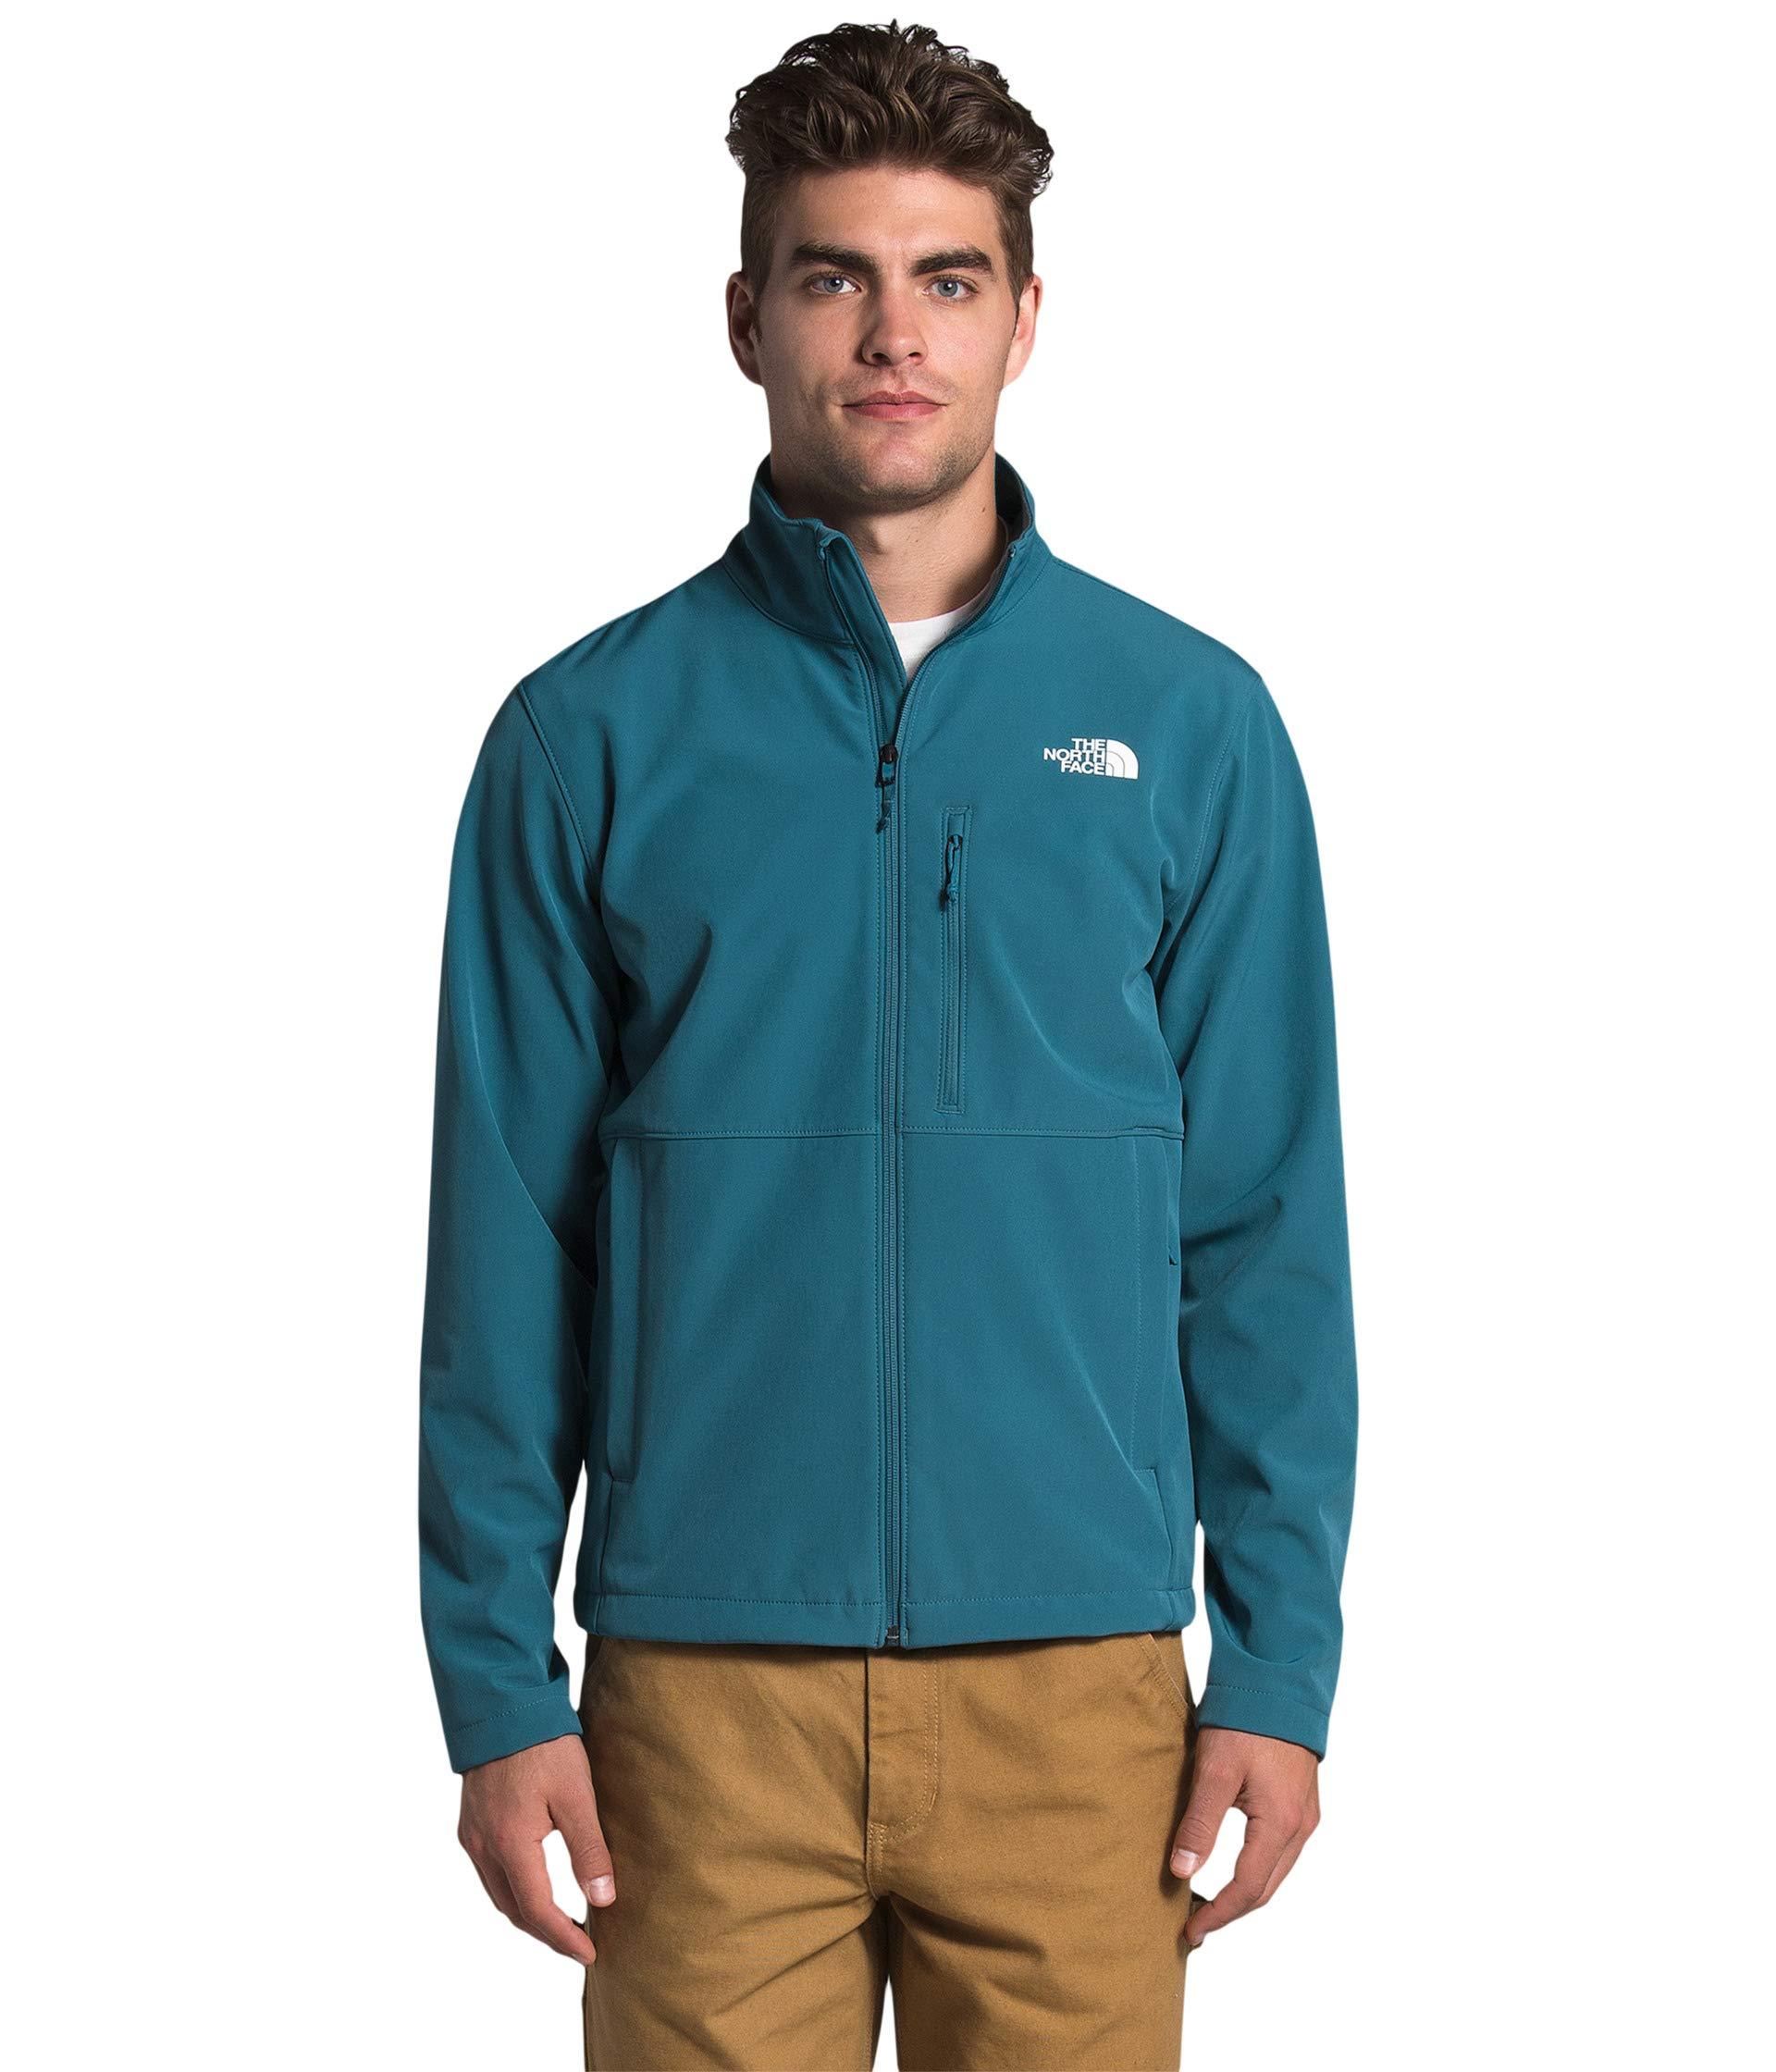 The North Face Synthetic Apex Bionic 2 Jacket in Blue for Men - Lyst